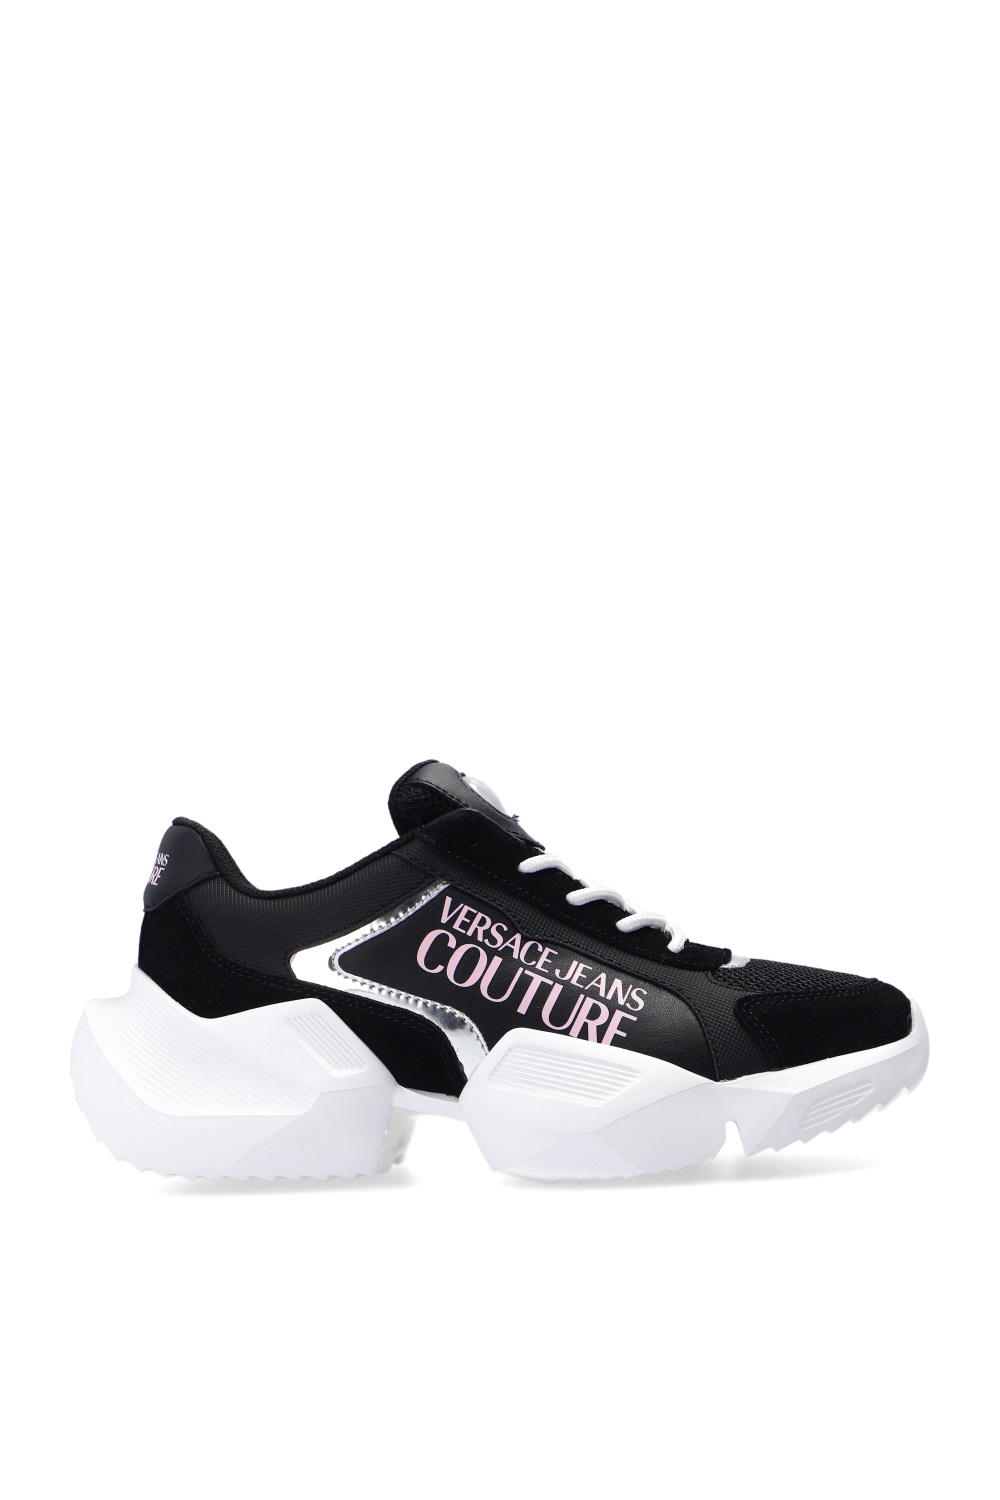 versace jeans couture sneakers